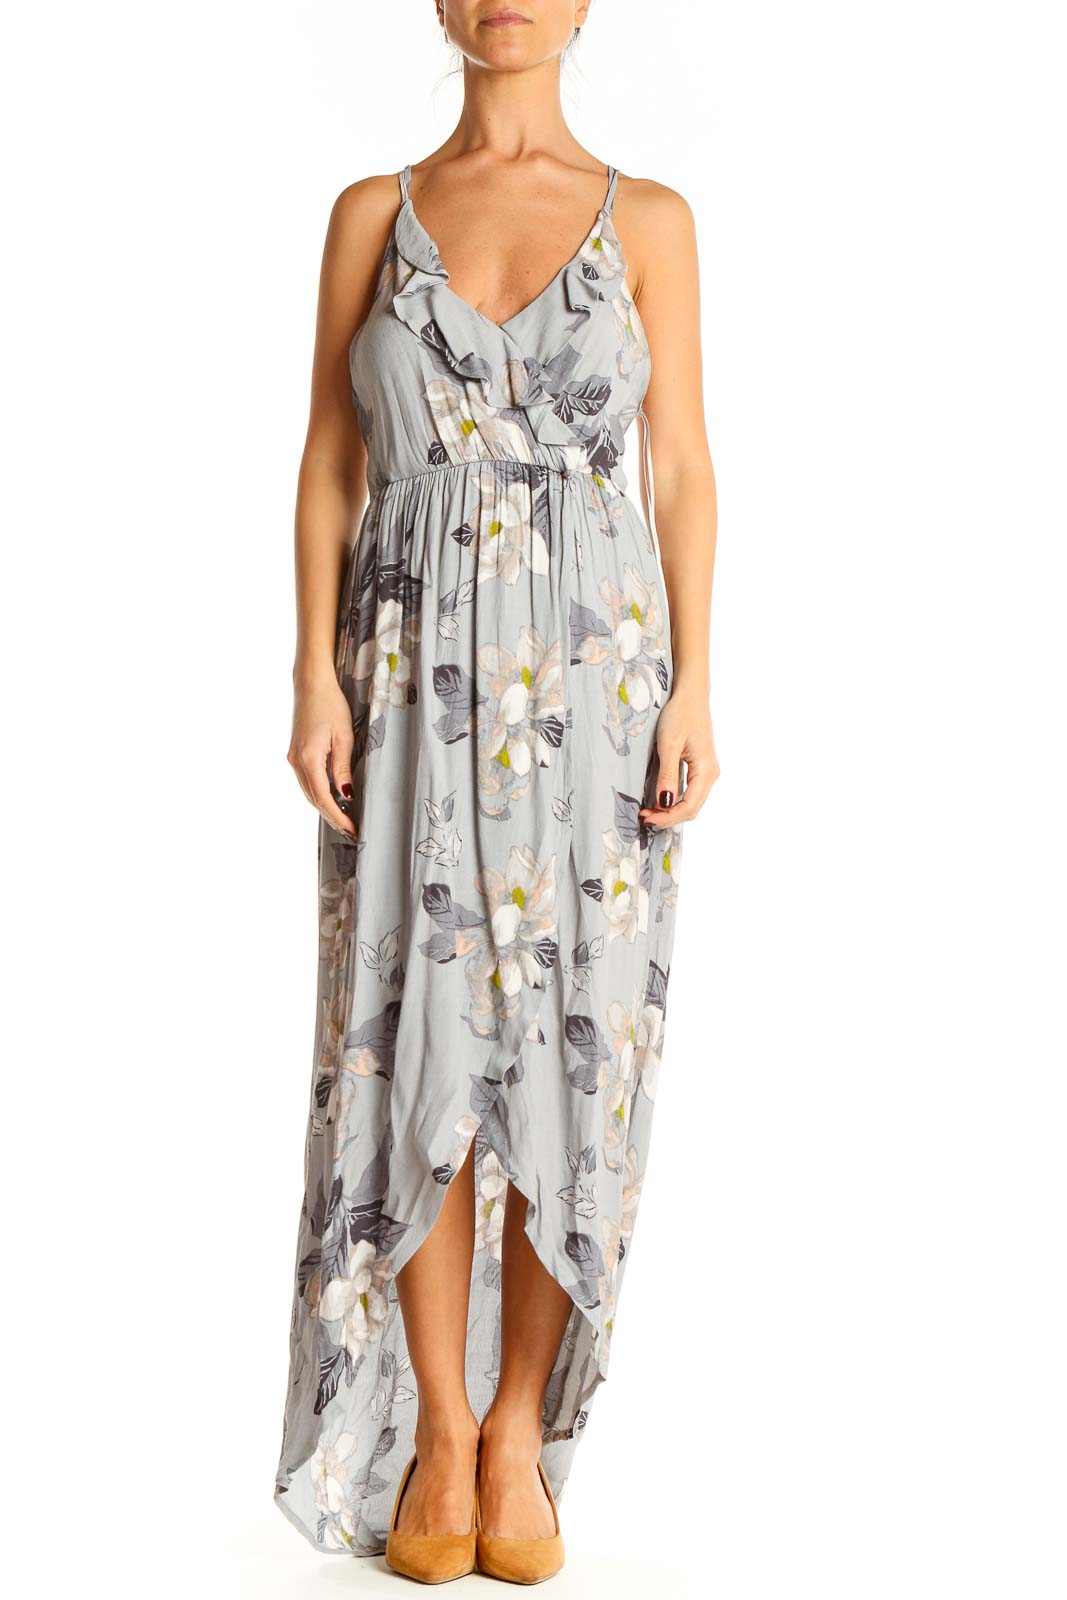 Gray Floral Print Bohemian Fit & Flare Dress Front